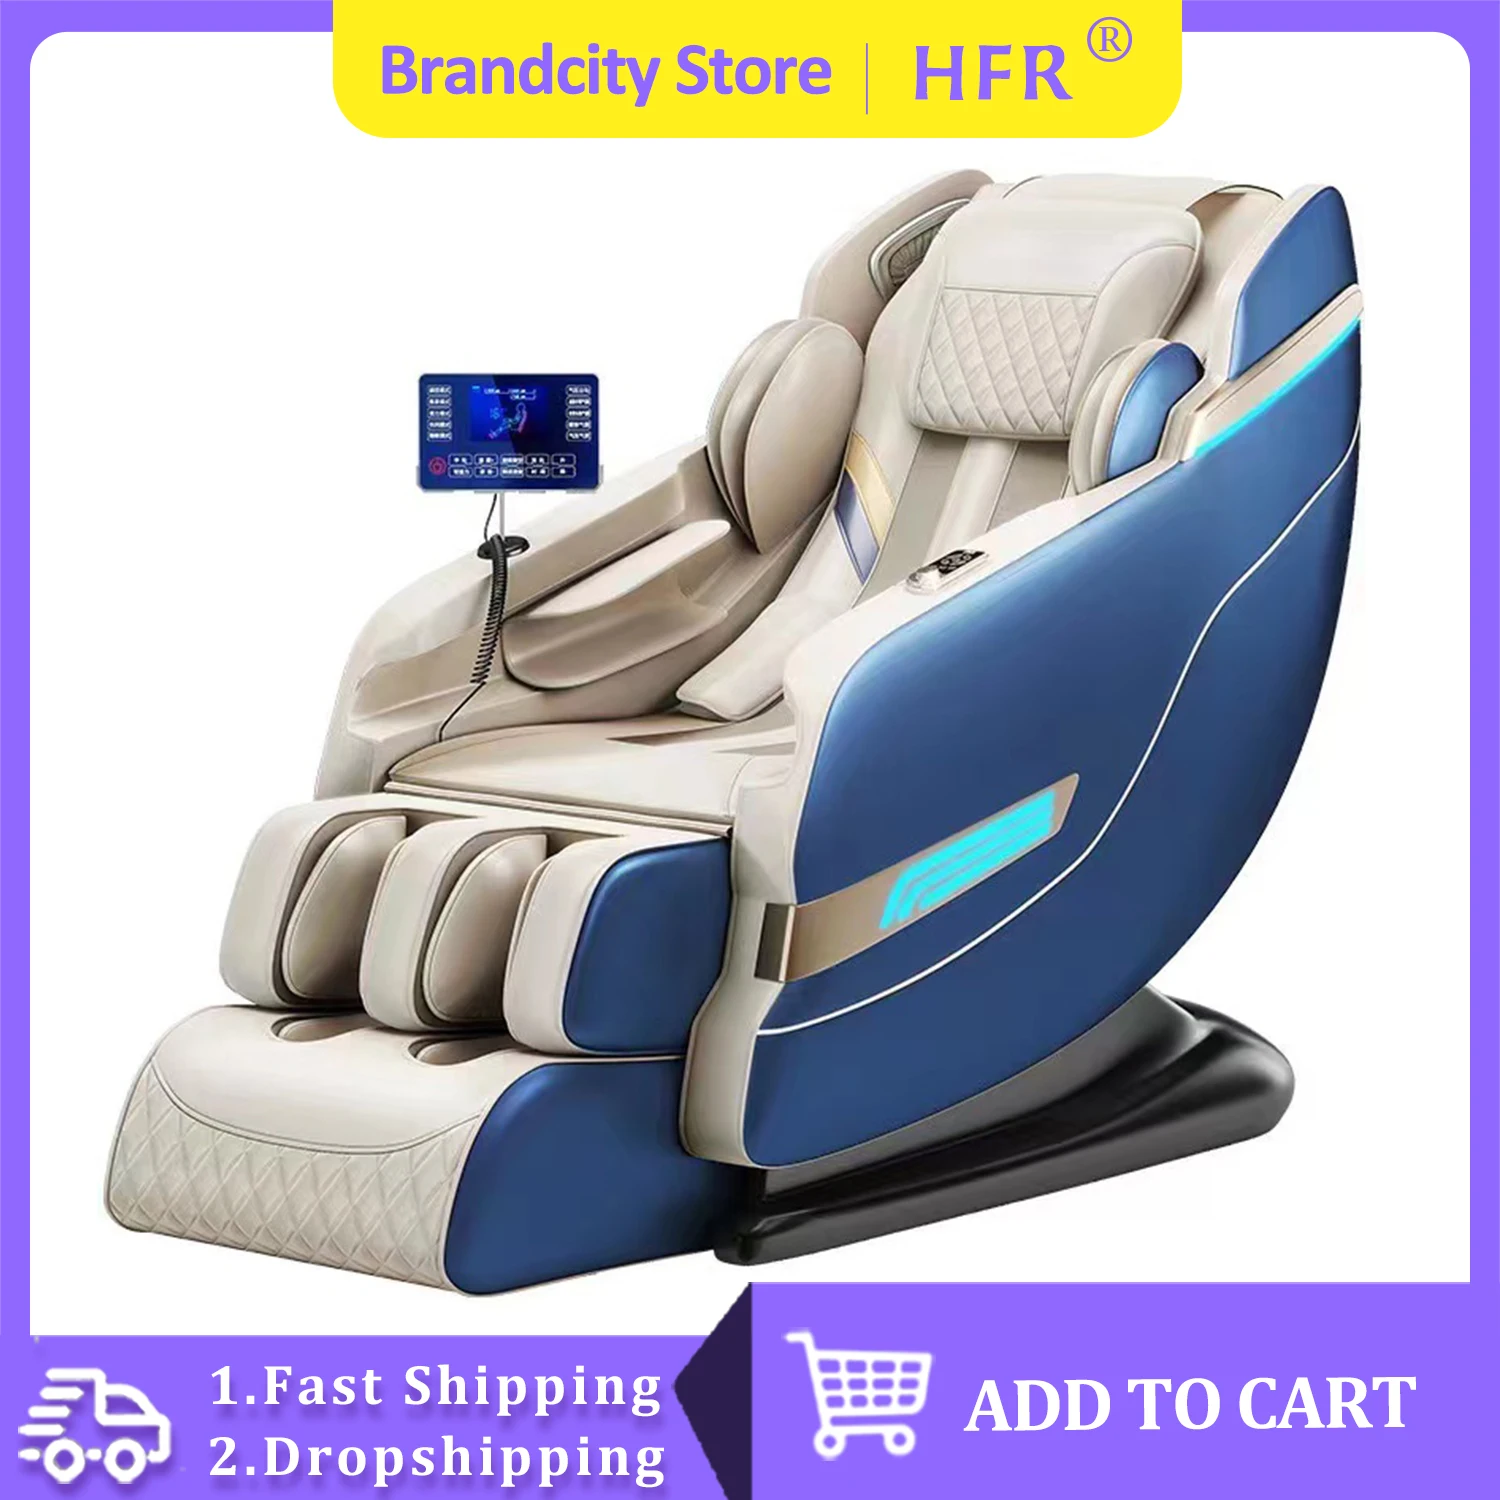 HFR-L3 Luxury massage chair home commercial multifunctional intelligent fully automatic shared capsule sofa high end internet celebrity trendy store multi functional luxury full body automatic first class space capsule intelligent elect